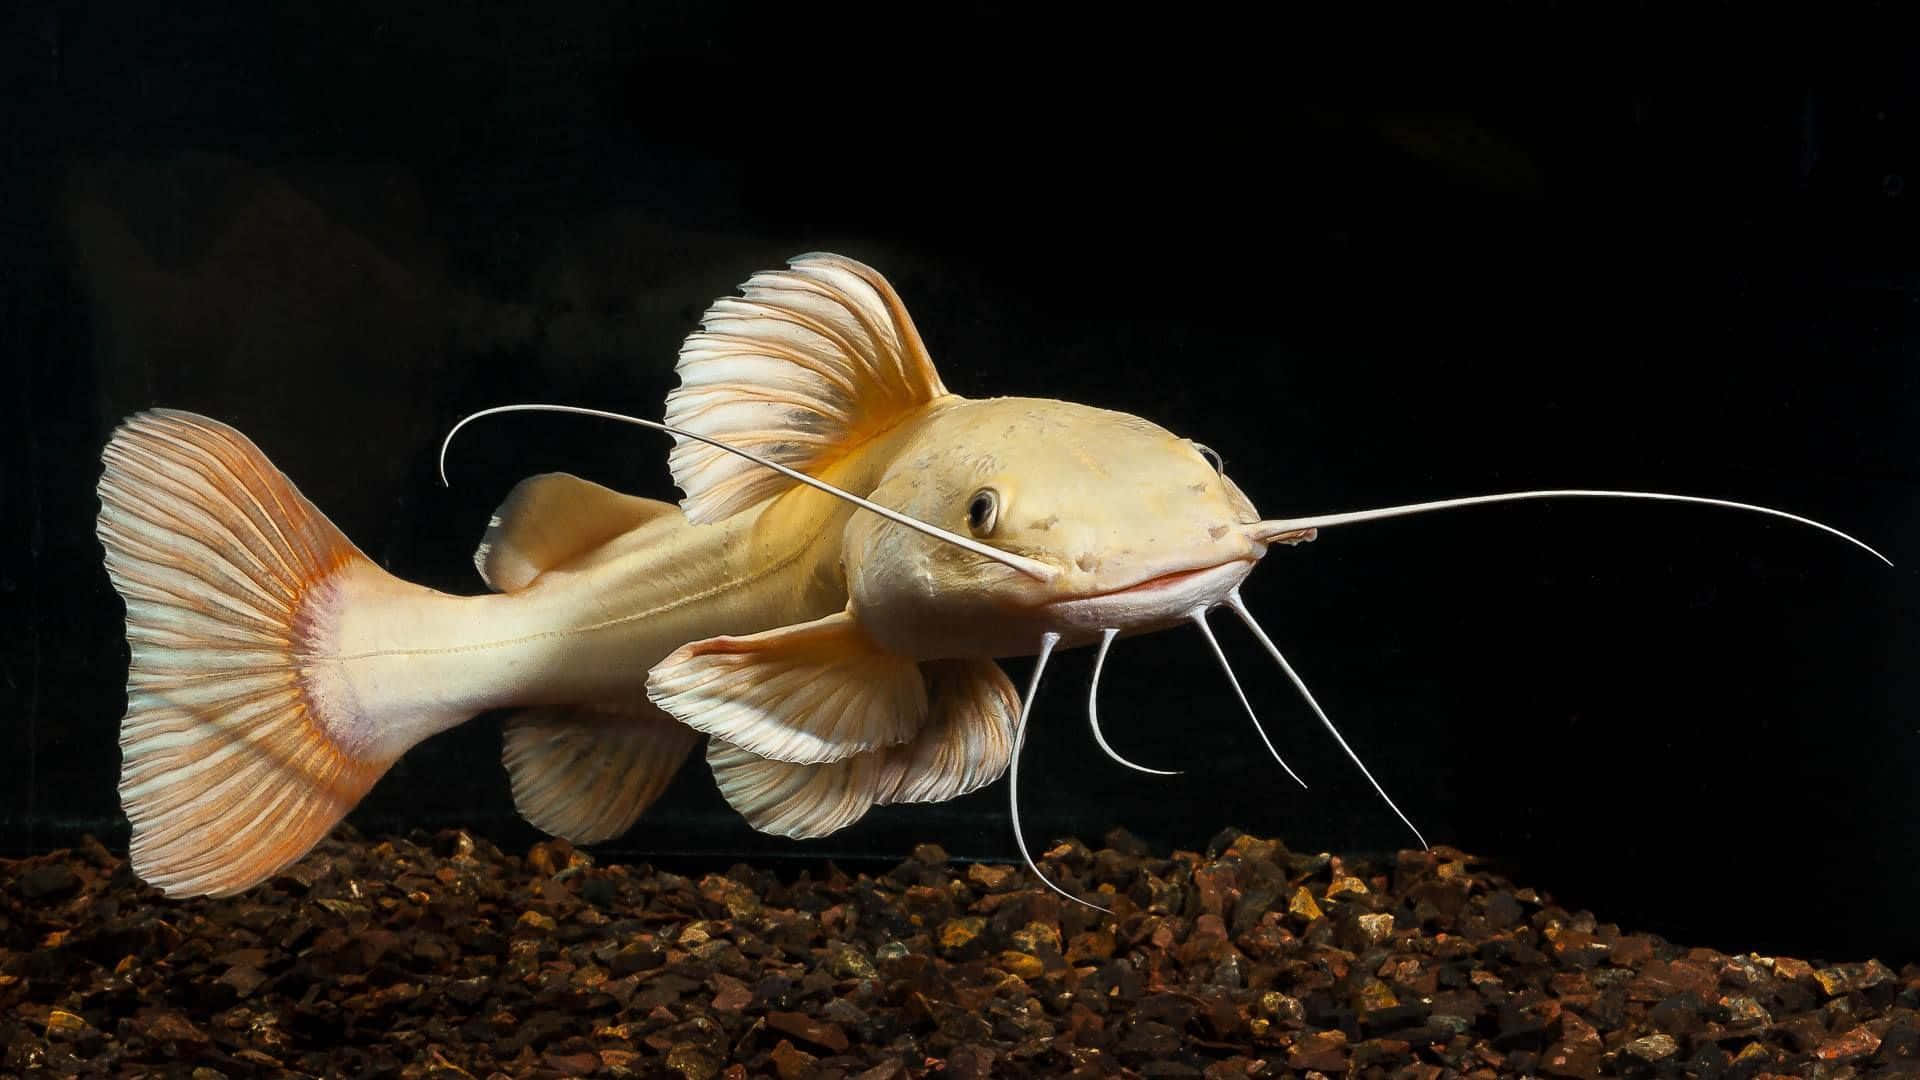 Close-up view of a fascinating catfish swimming underwater